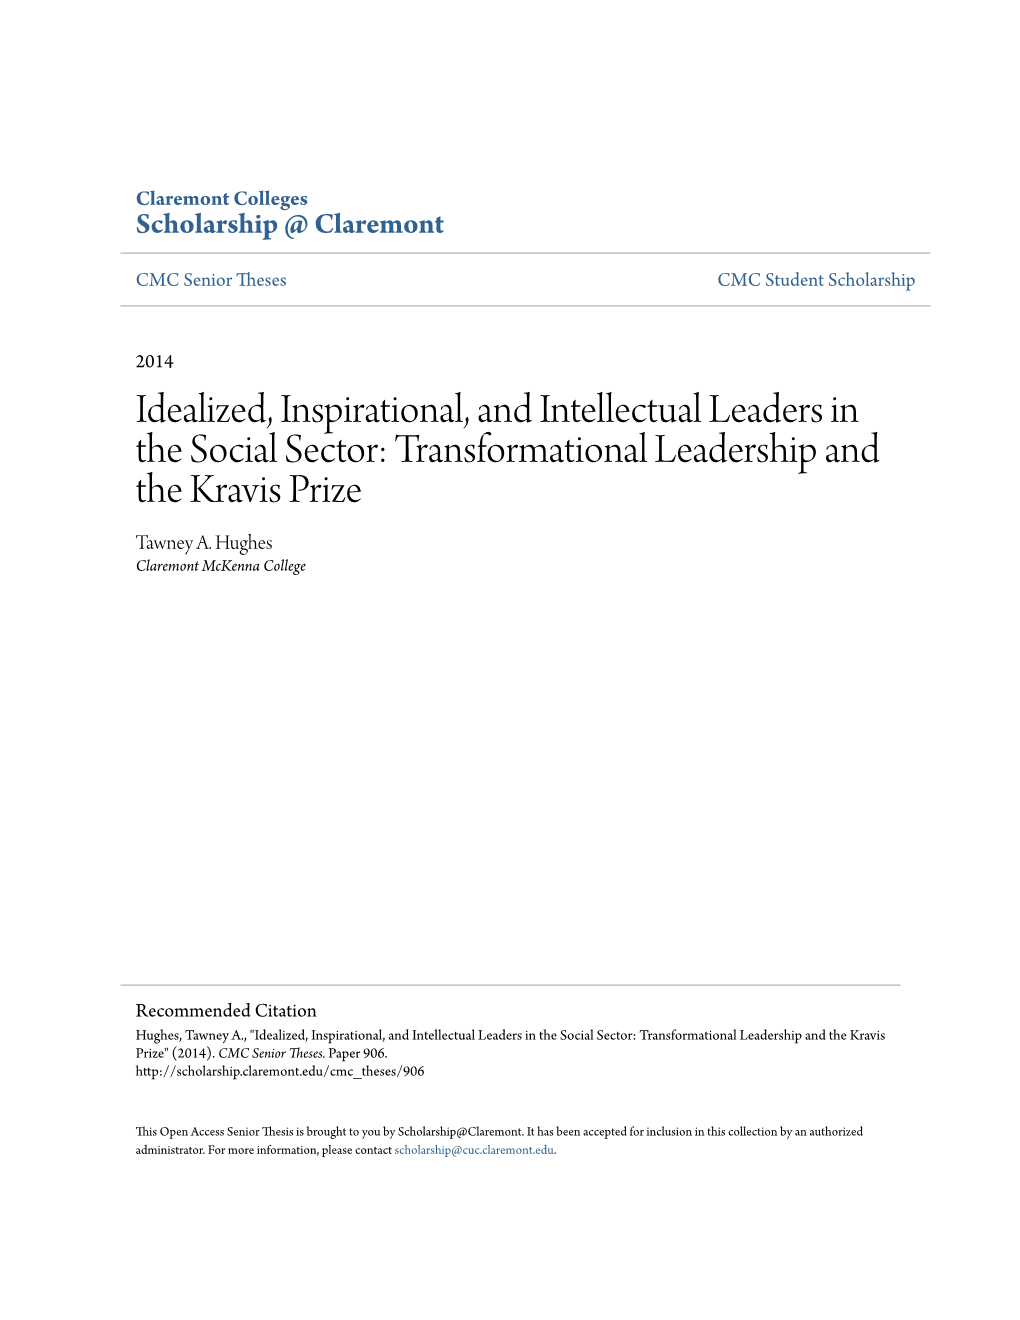 Transformational Leadership and the Kravis Prize Tawney A